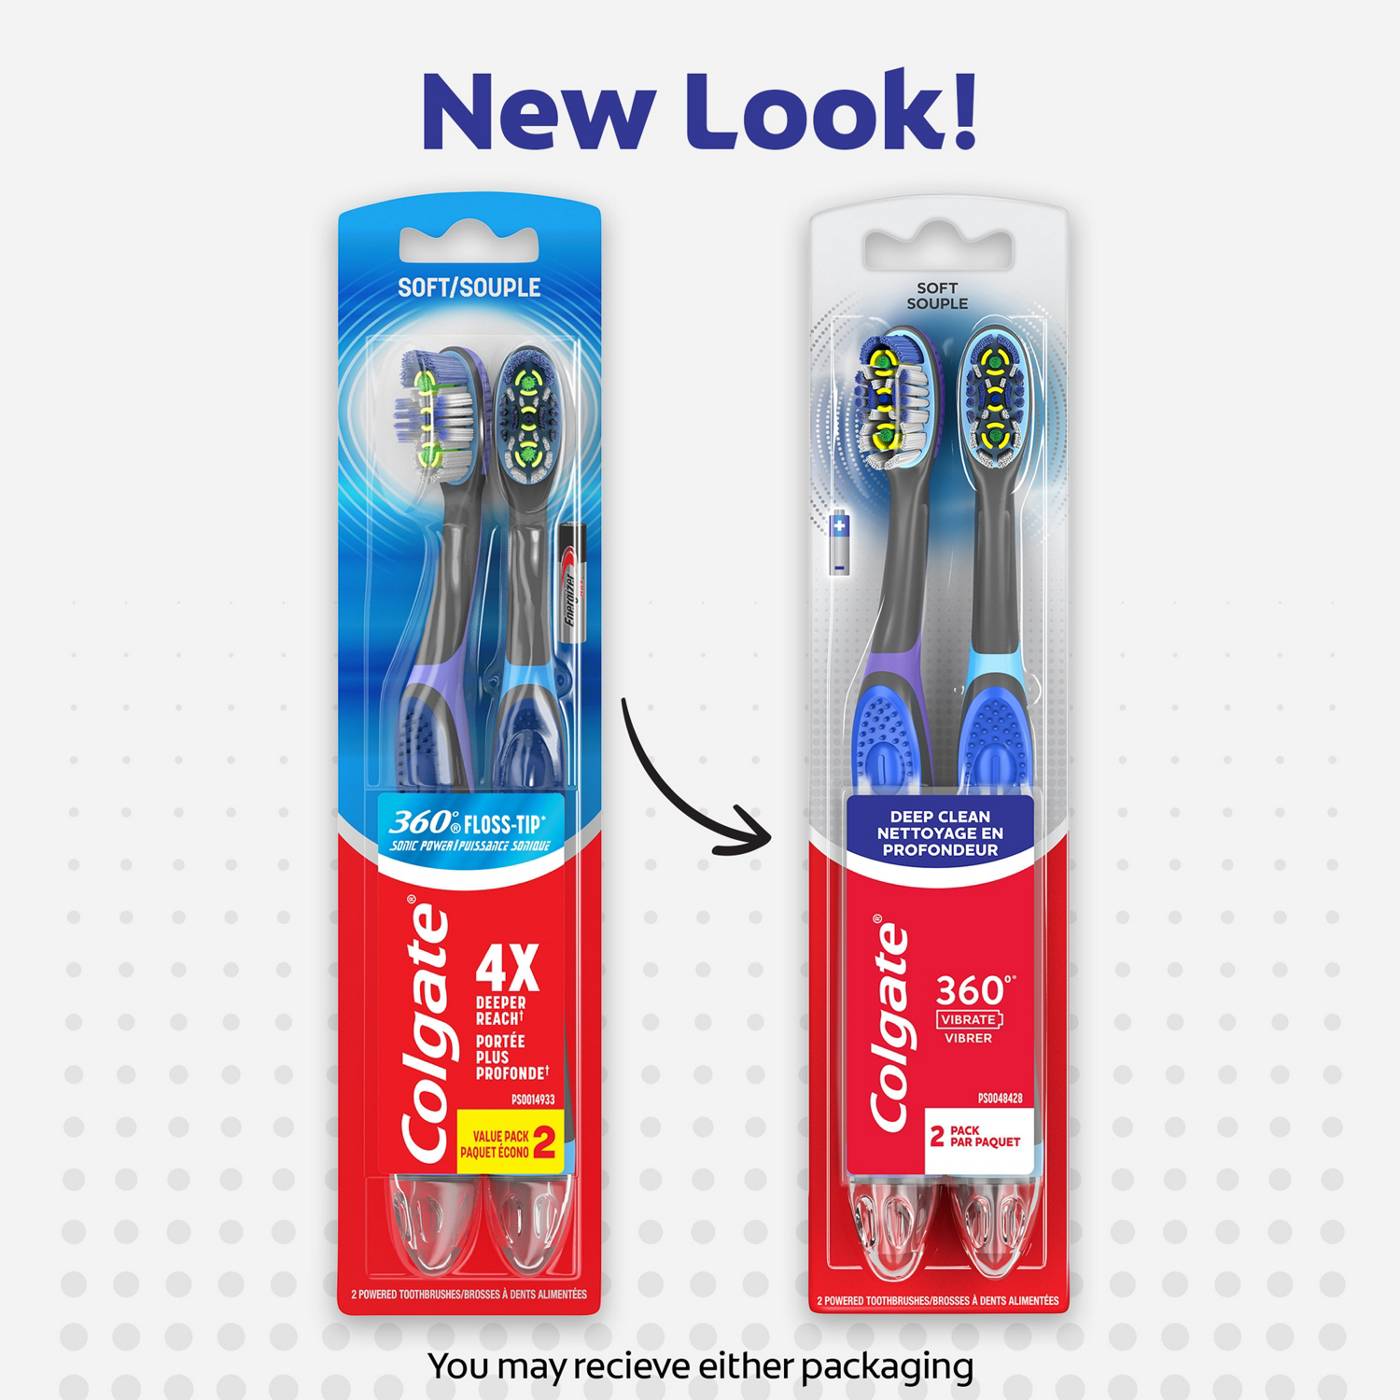 Colgate 360 Floss -Tip Sonic Powered Toothbrush - Soft; image 5 of 10